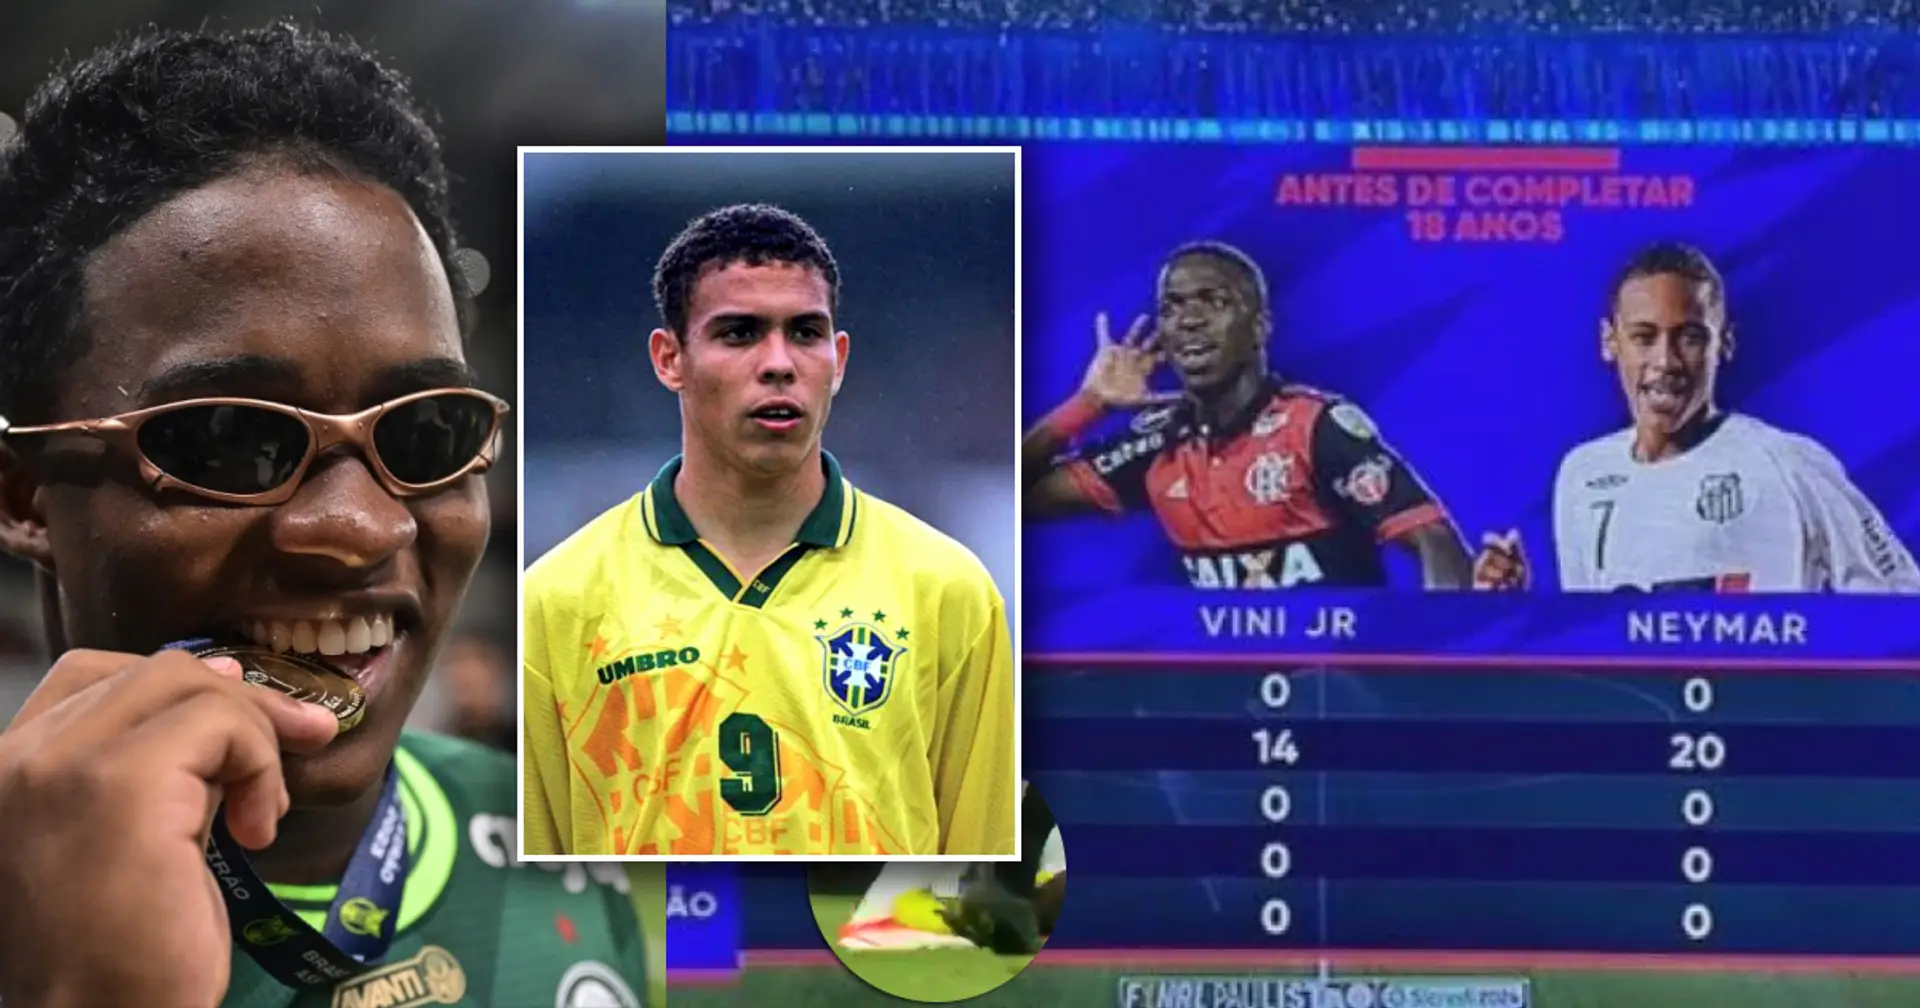 Endrick before turning 18 compared to Neymar, Ronaldo and Vini Jr at same age — the difference will shock you